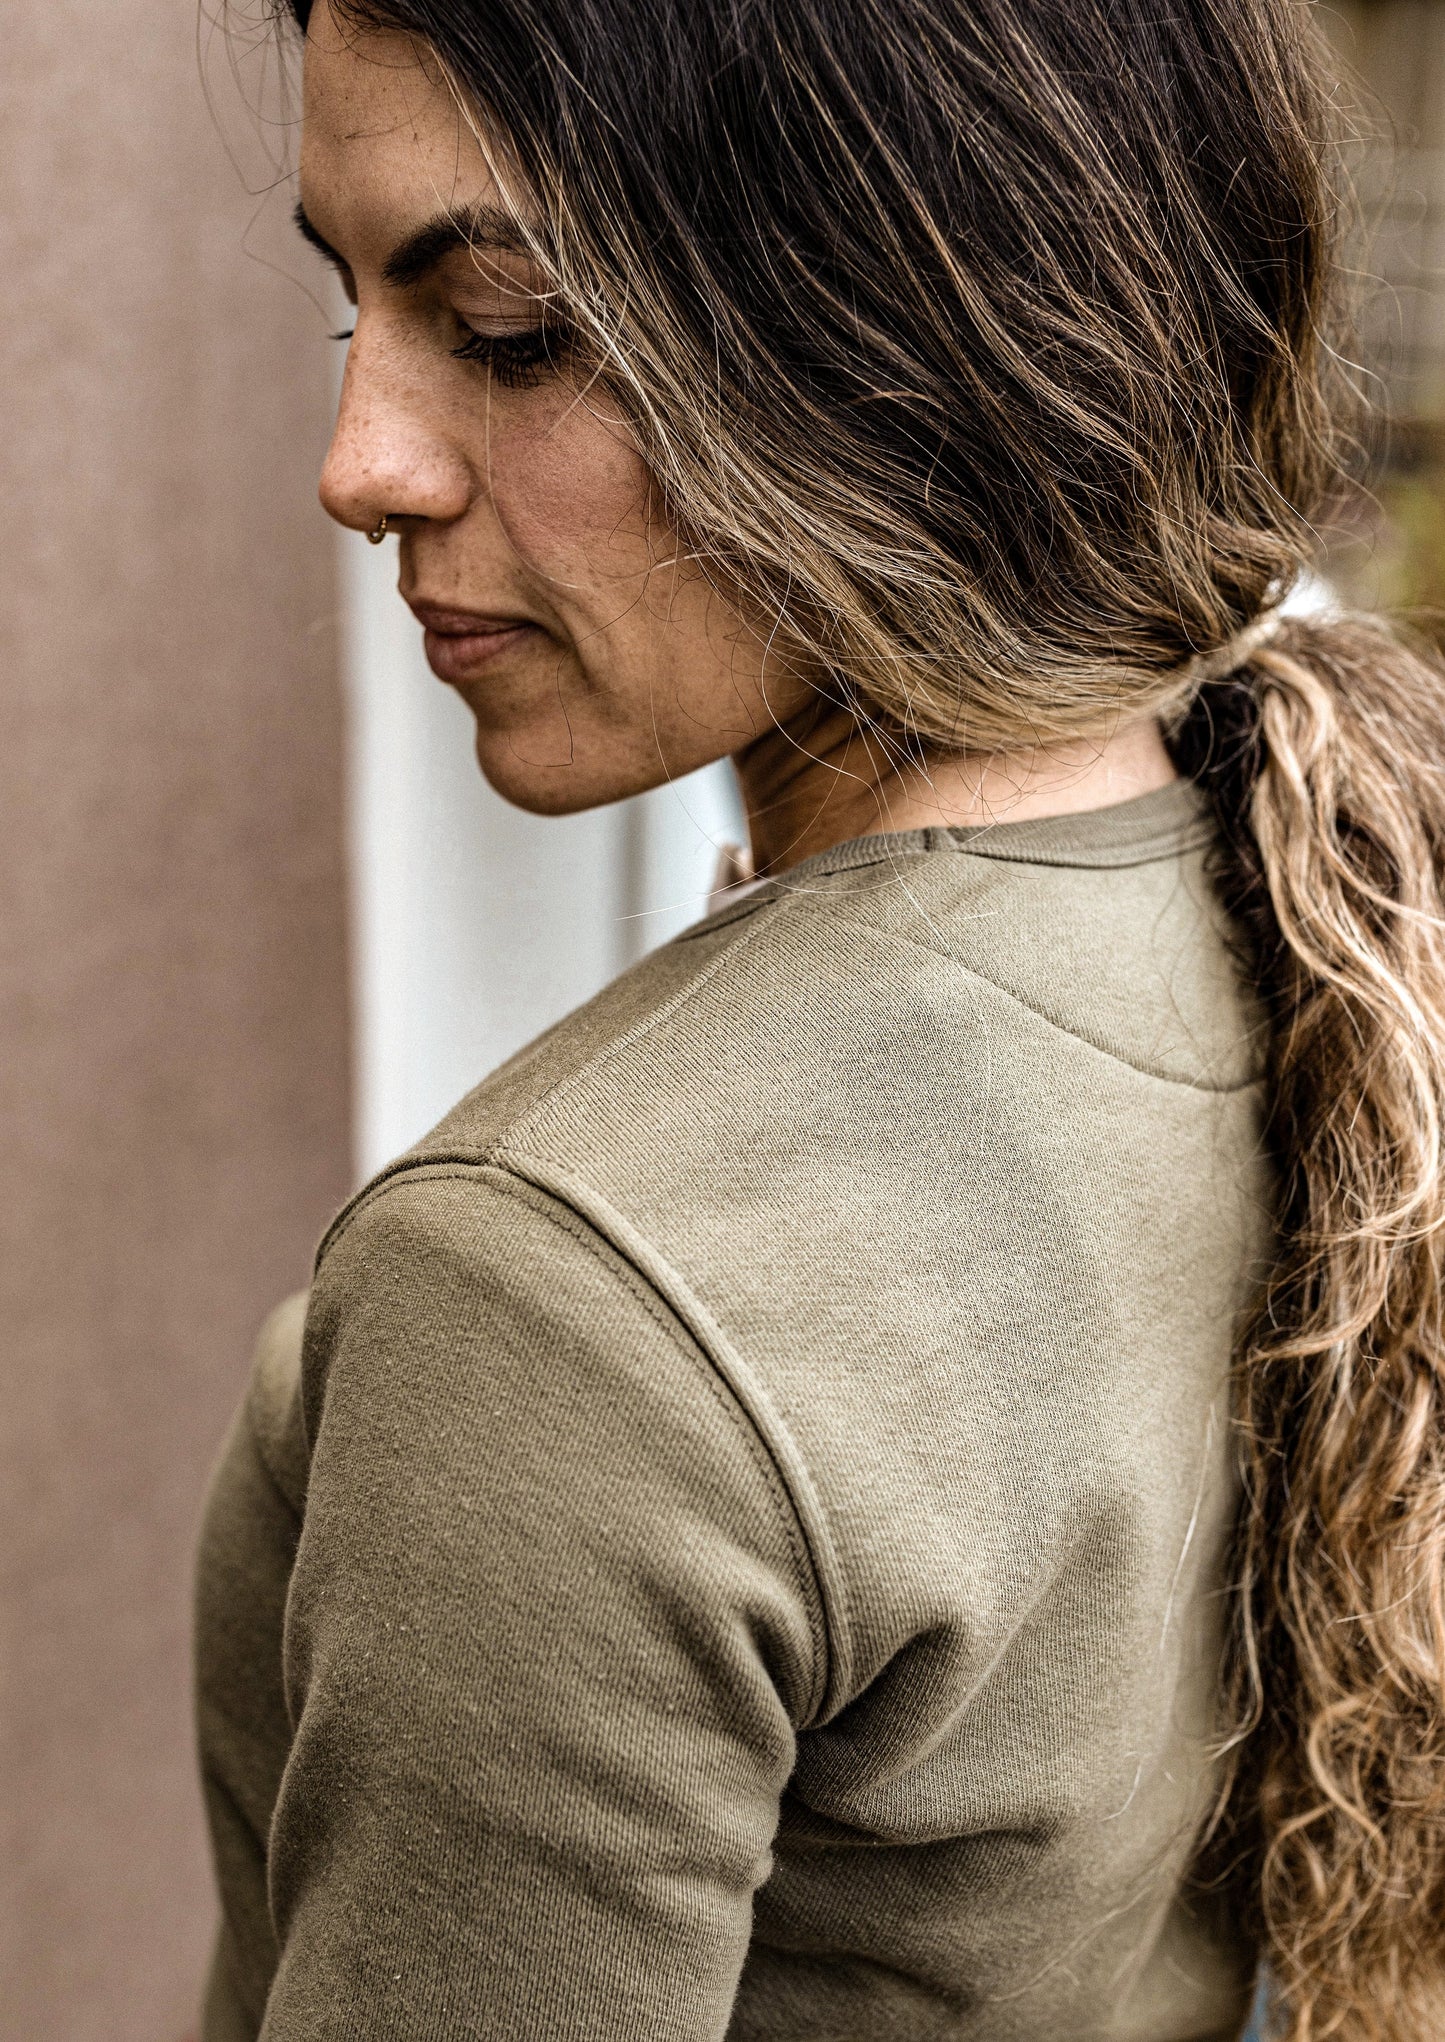 Women's Bodega 14oz French Terry Pullover | 100% American Made Cotton - Olive